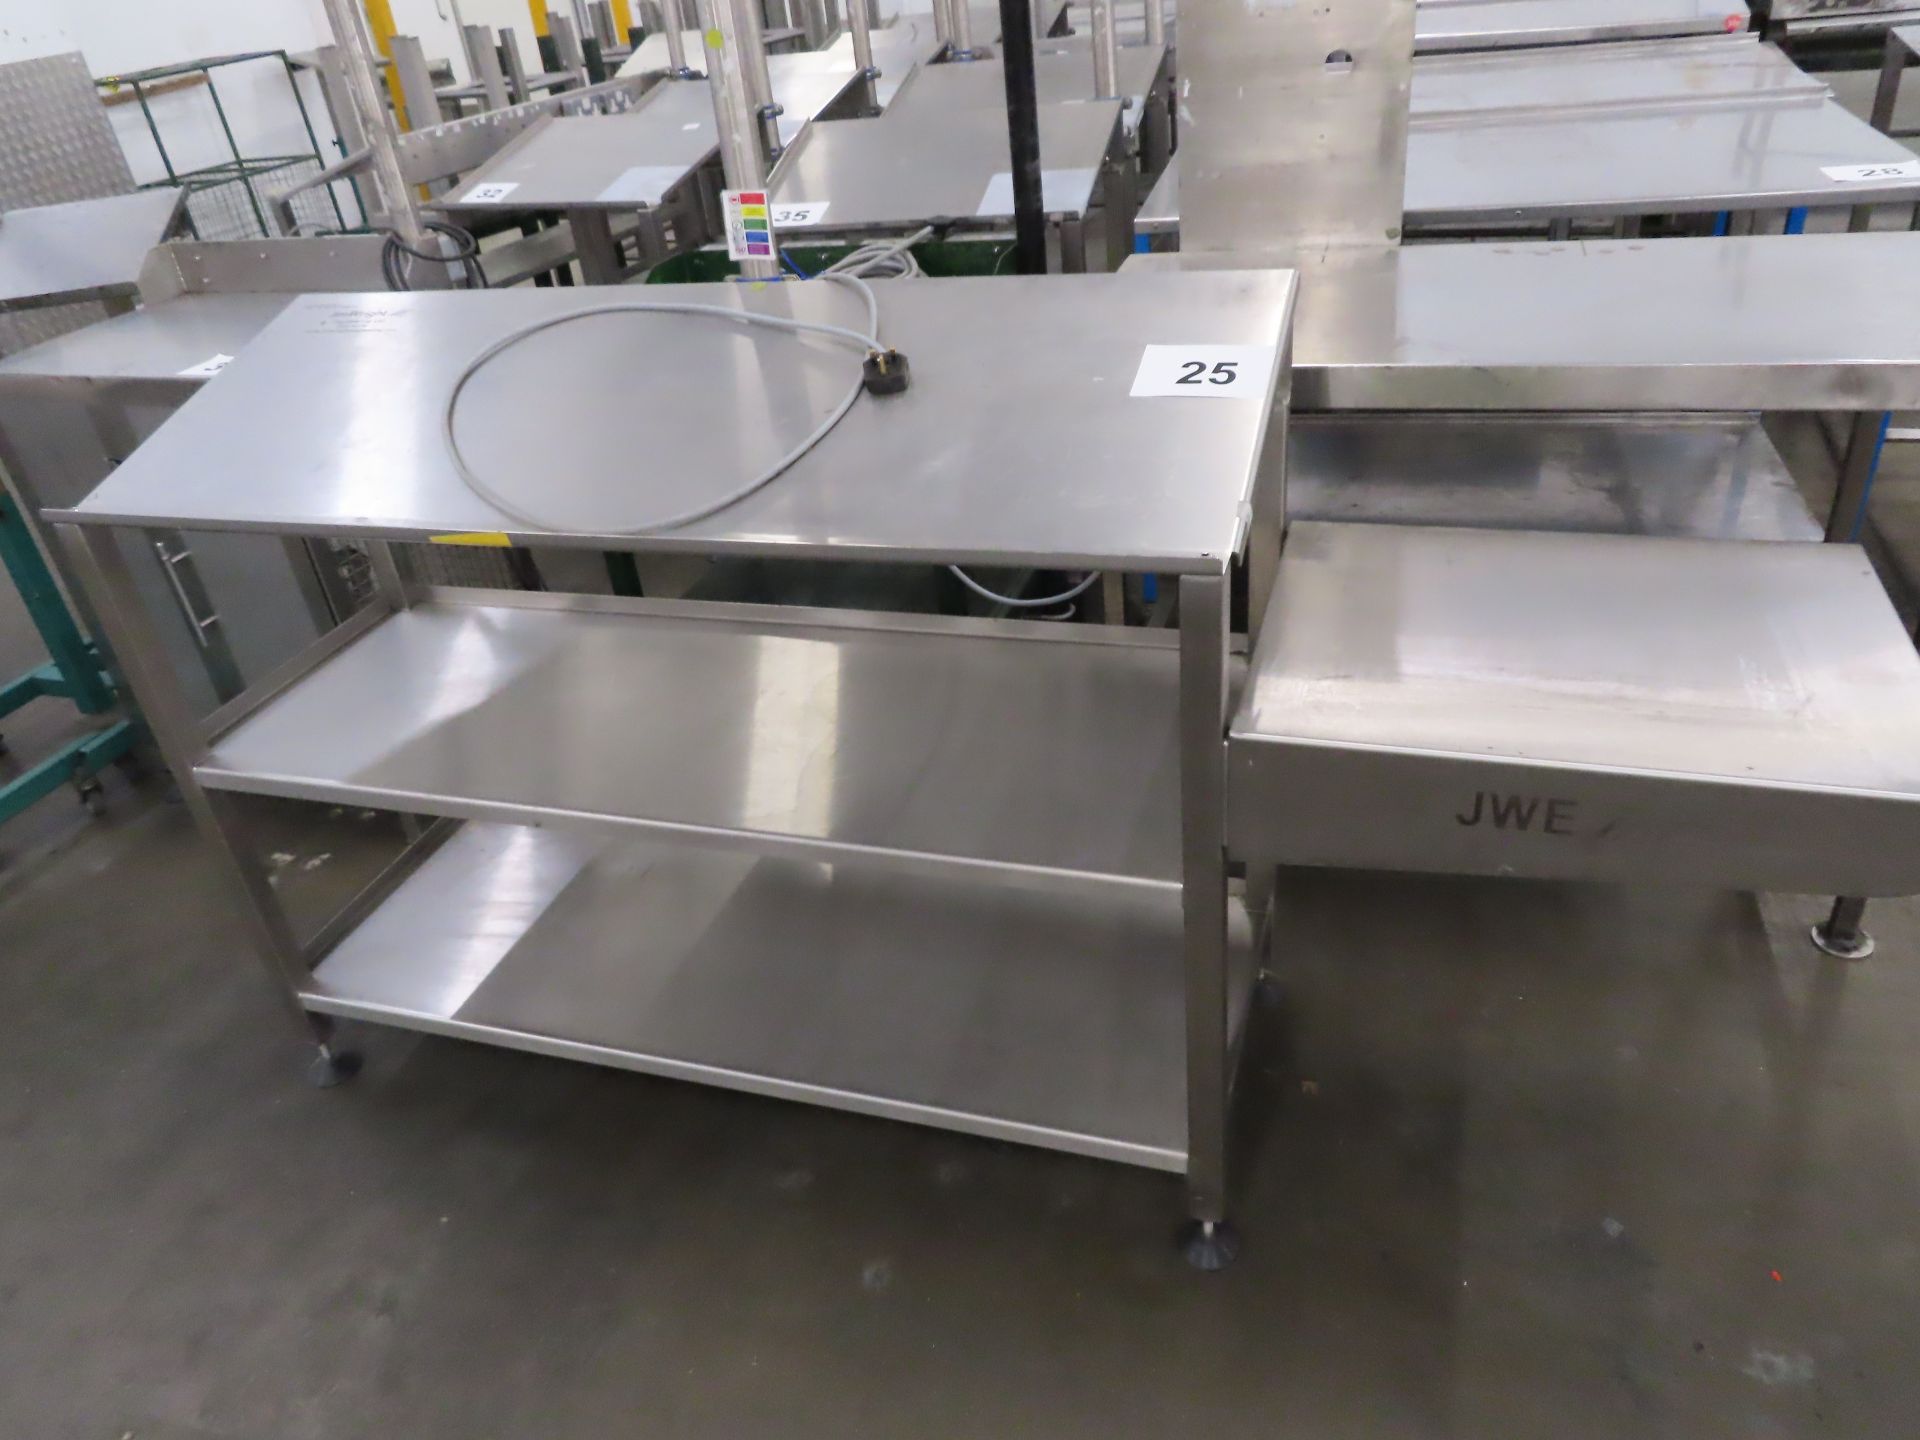 STAINLESS STEEL HEAVY DUTY TABLE.